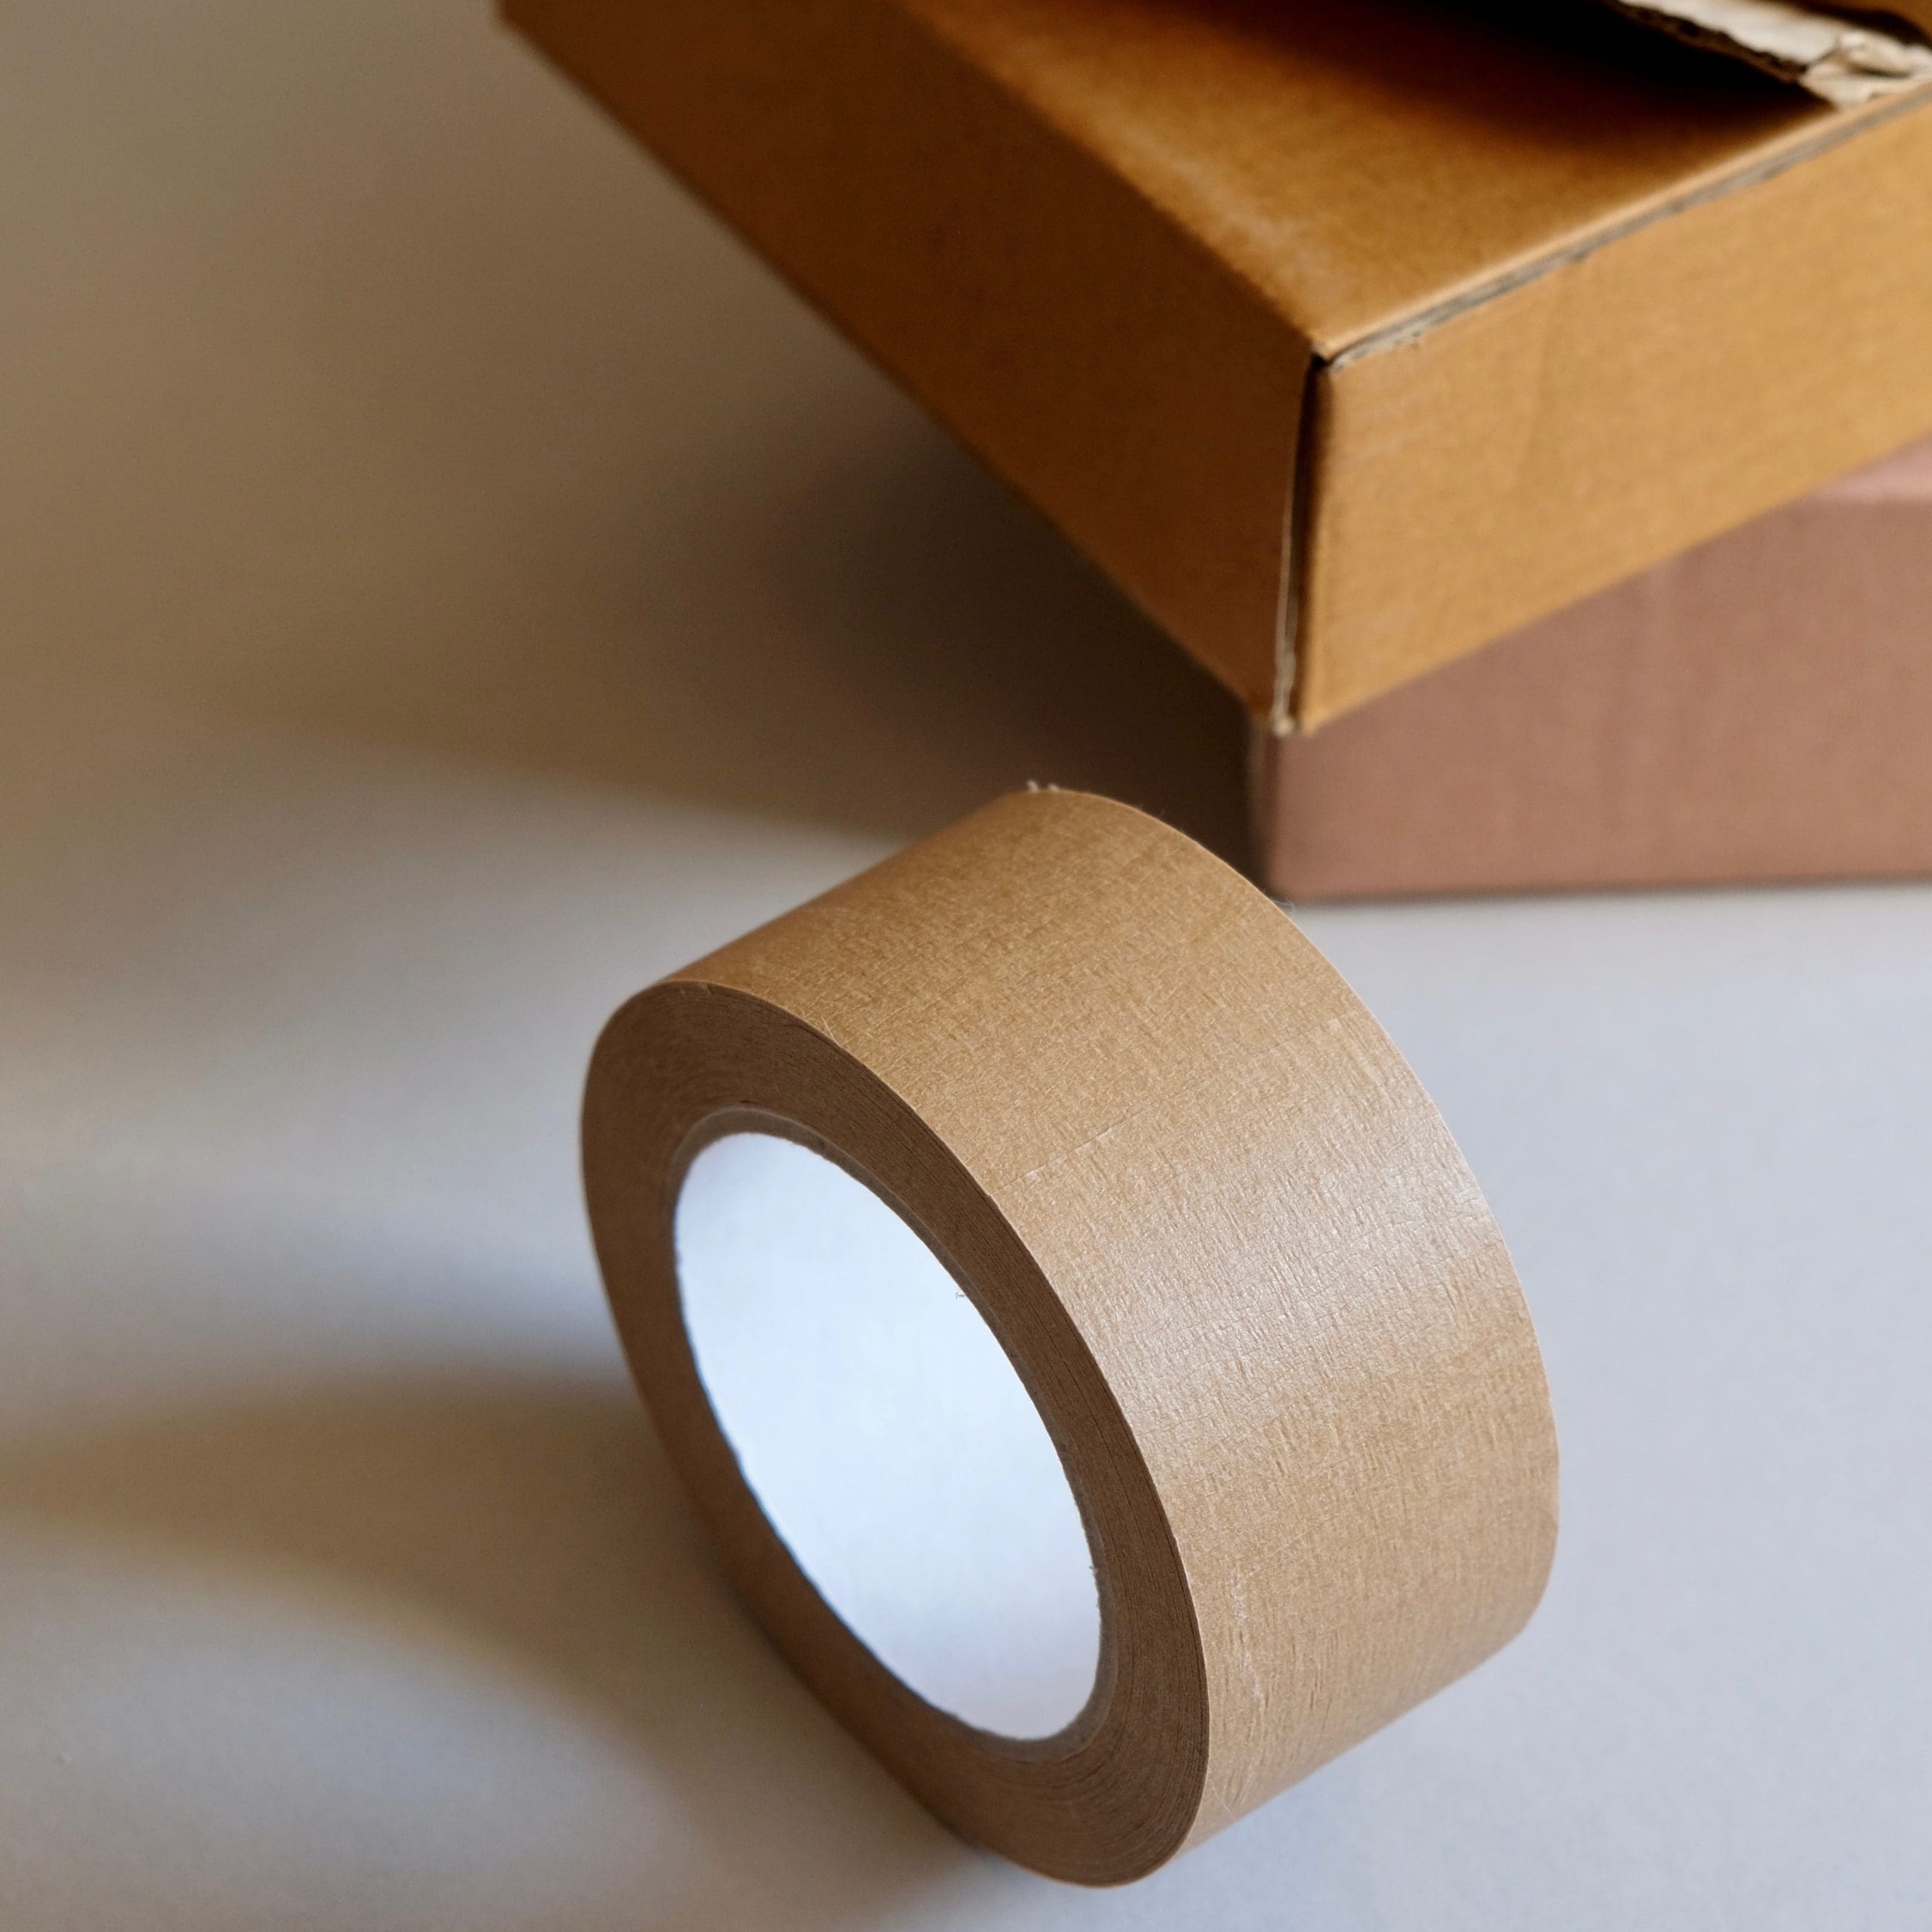 A roll of packing tape